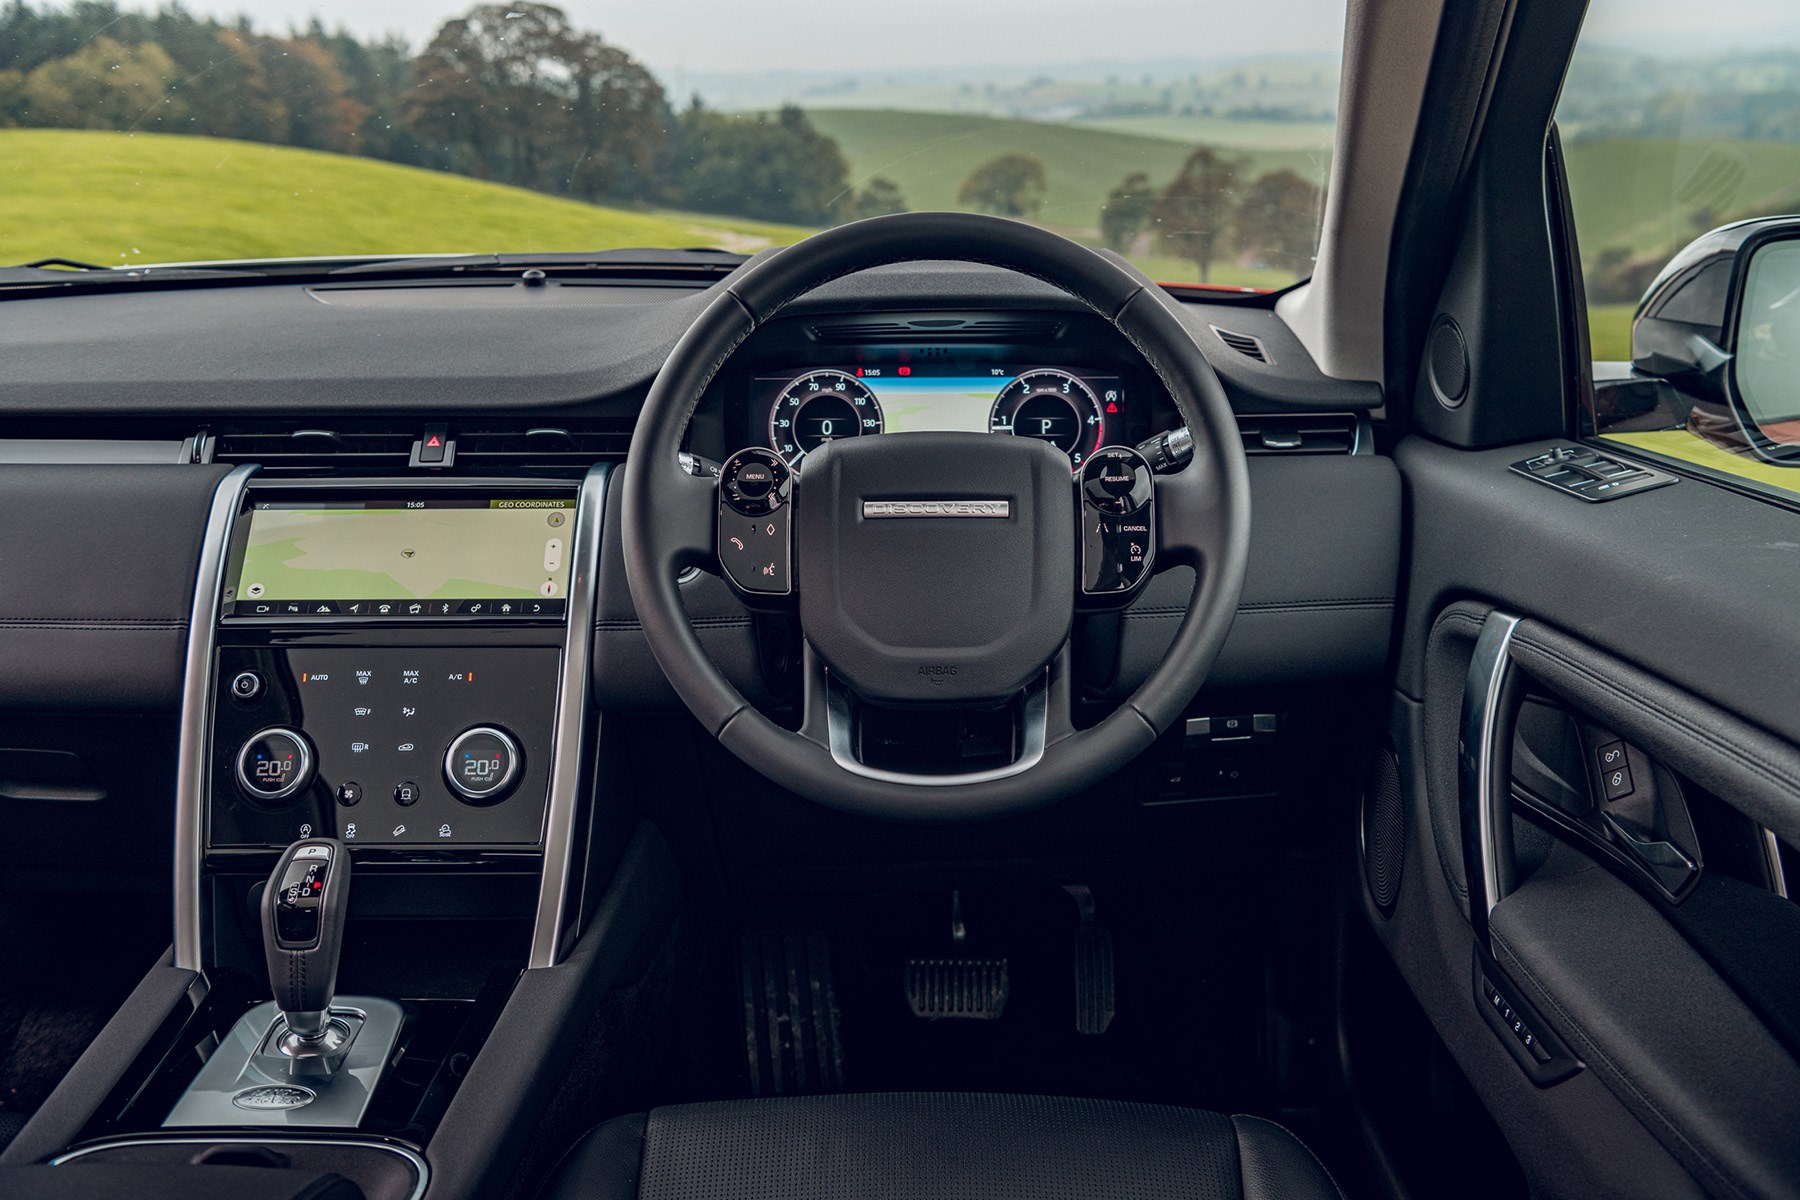 2019 Land Rover Discovery Sport driving position